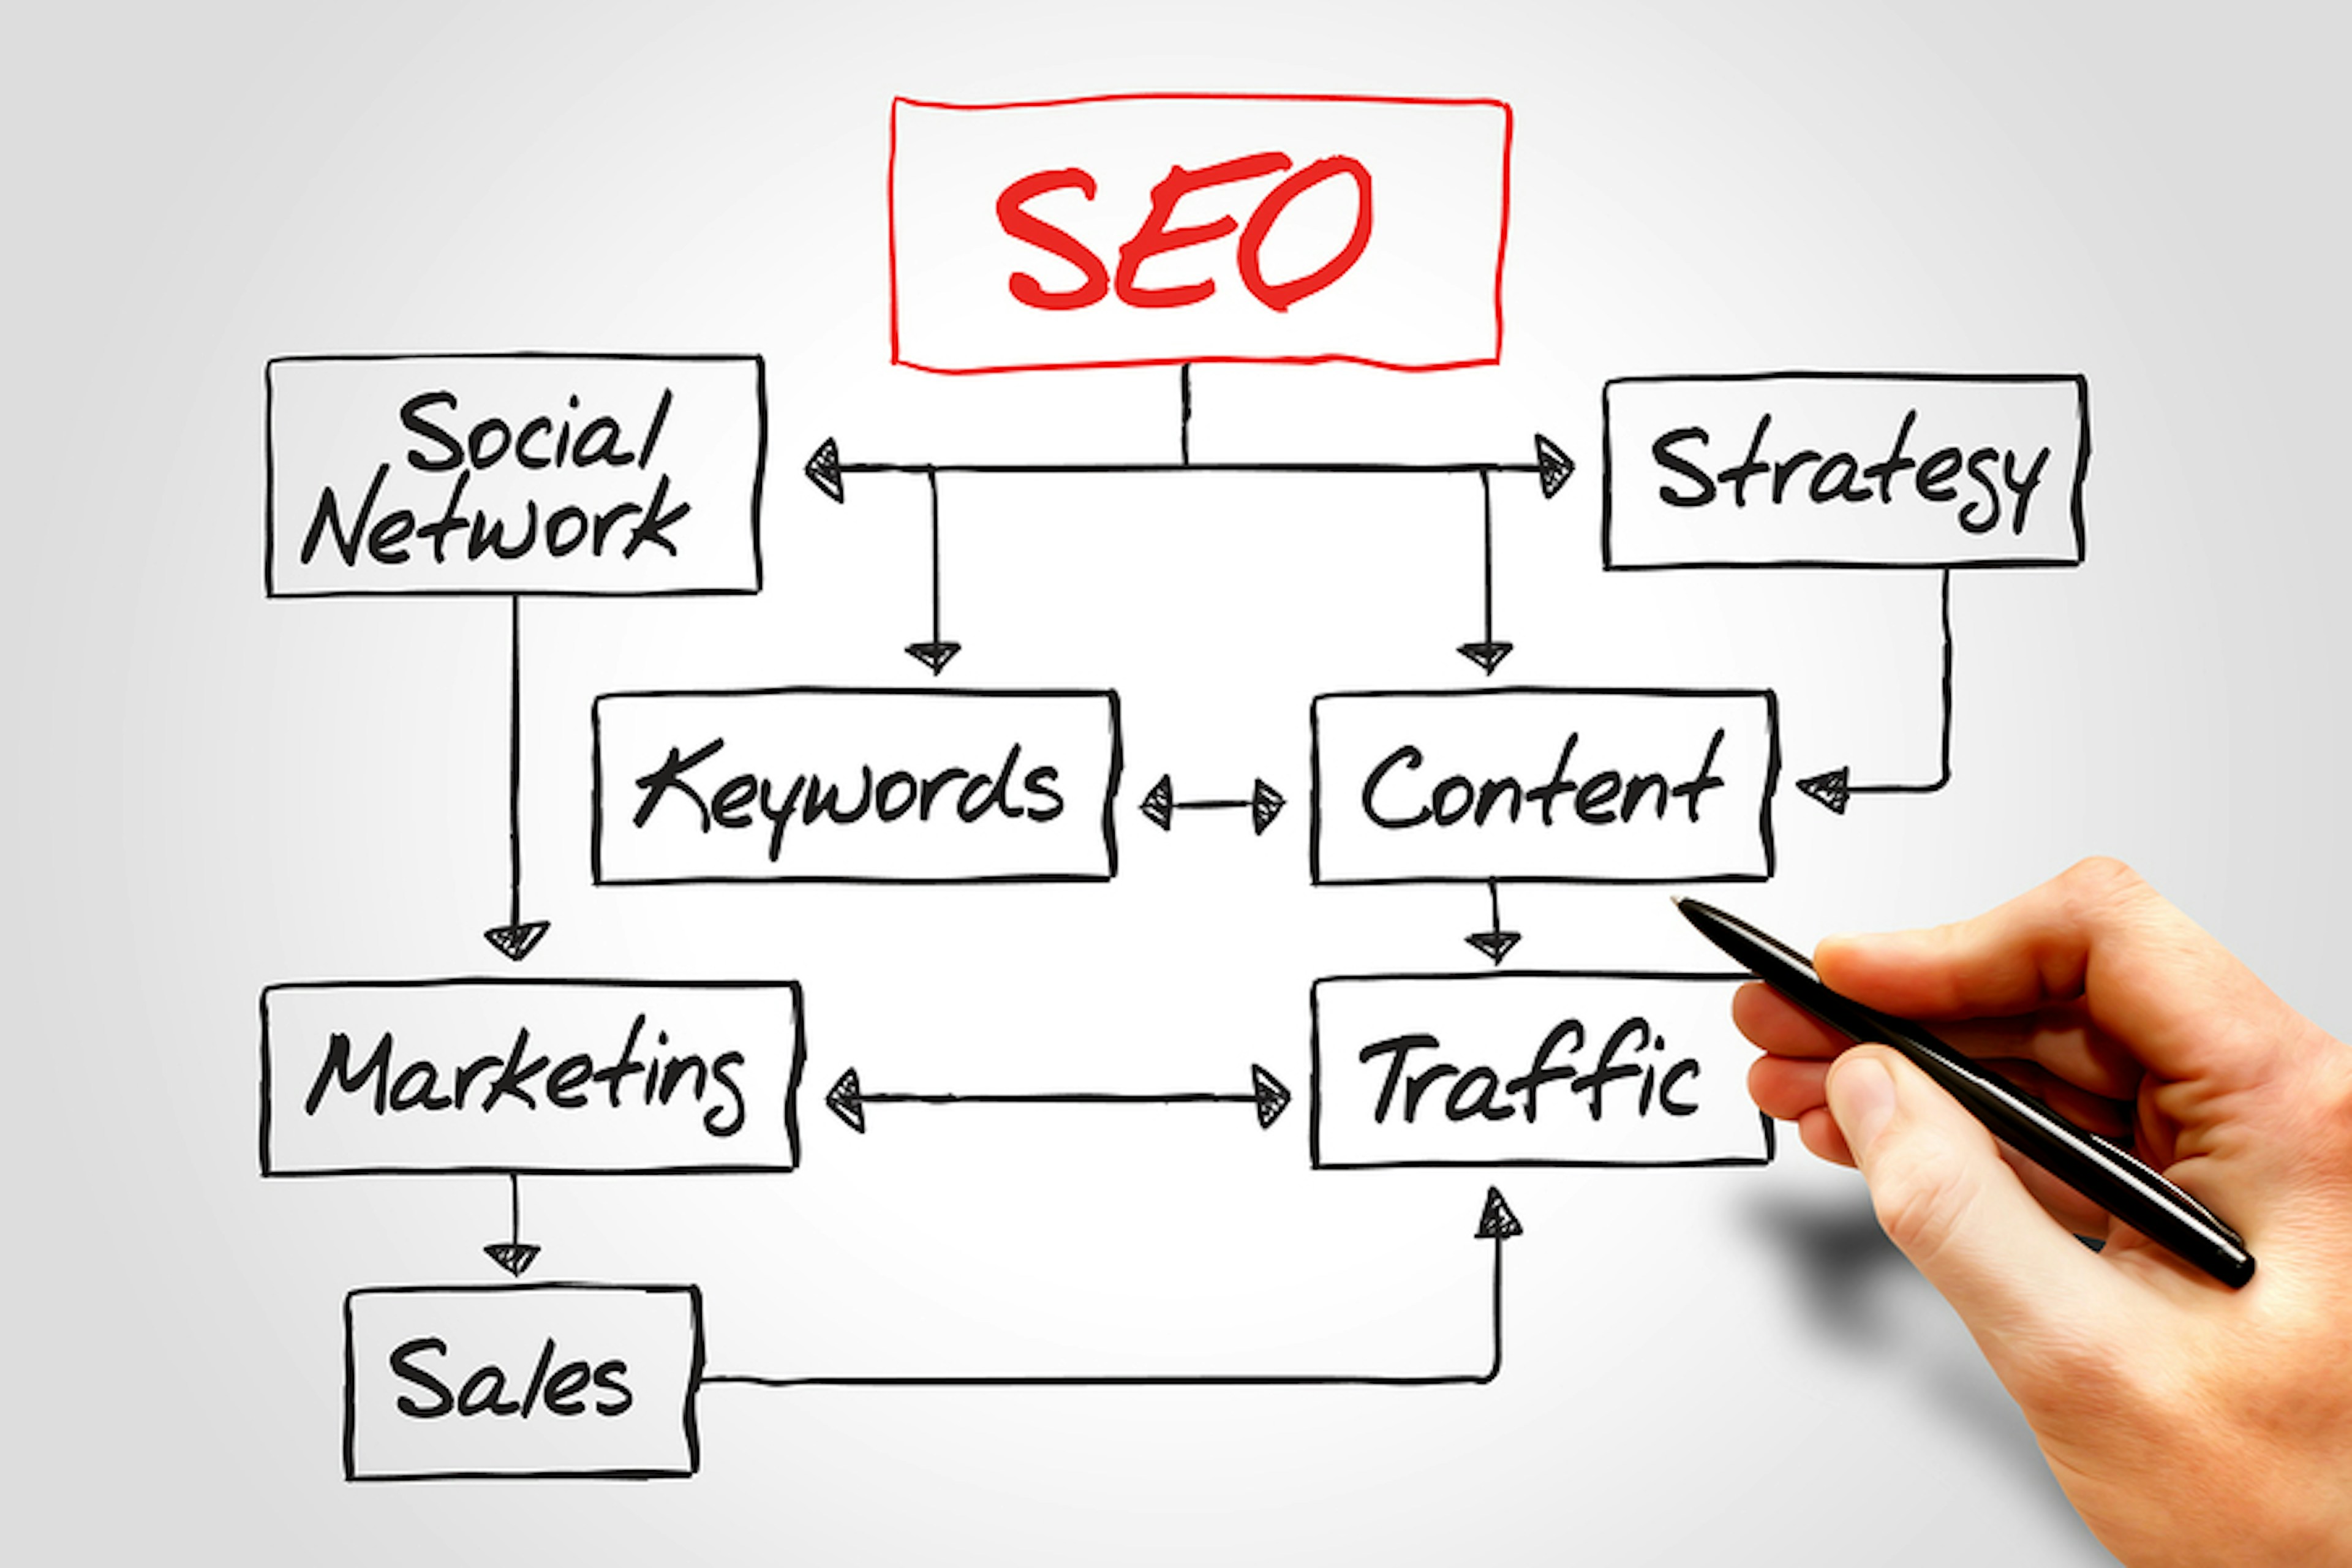 What should you expect from SEO and SEM services?